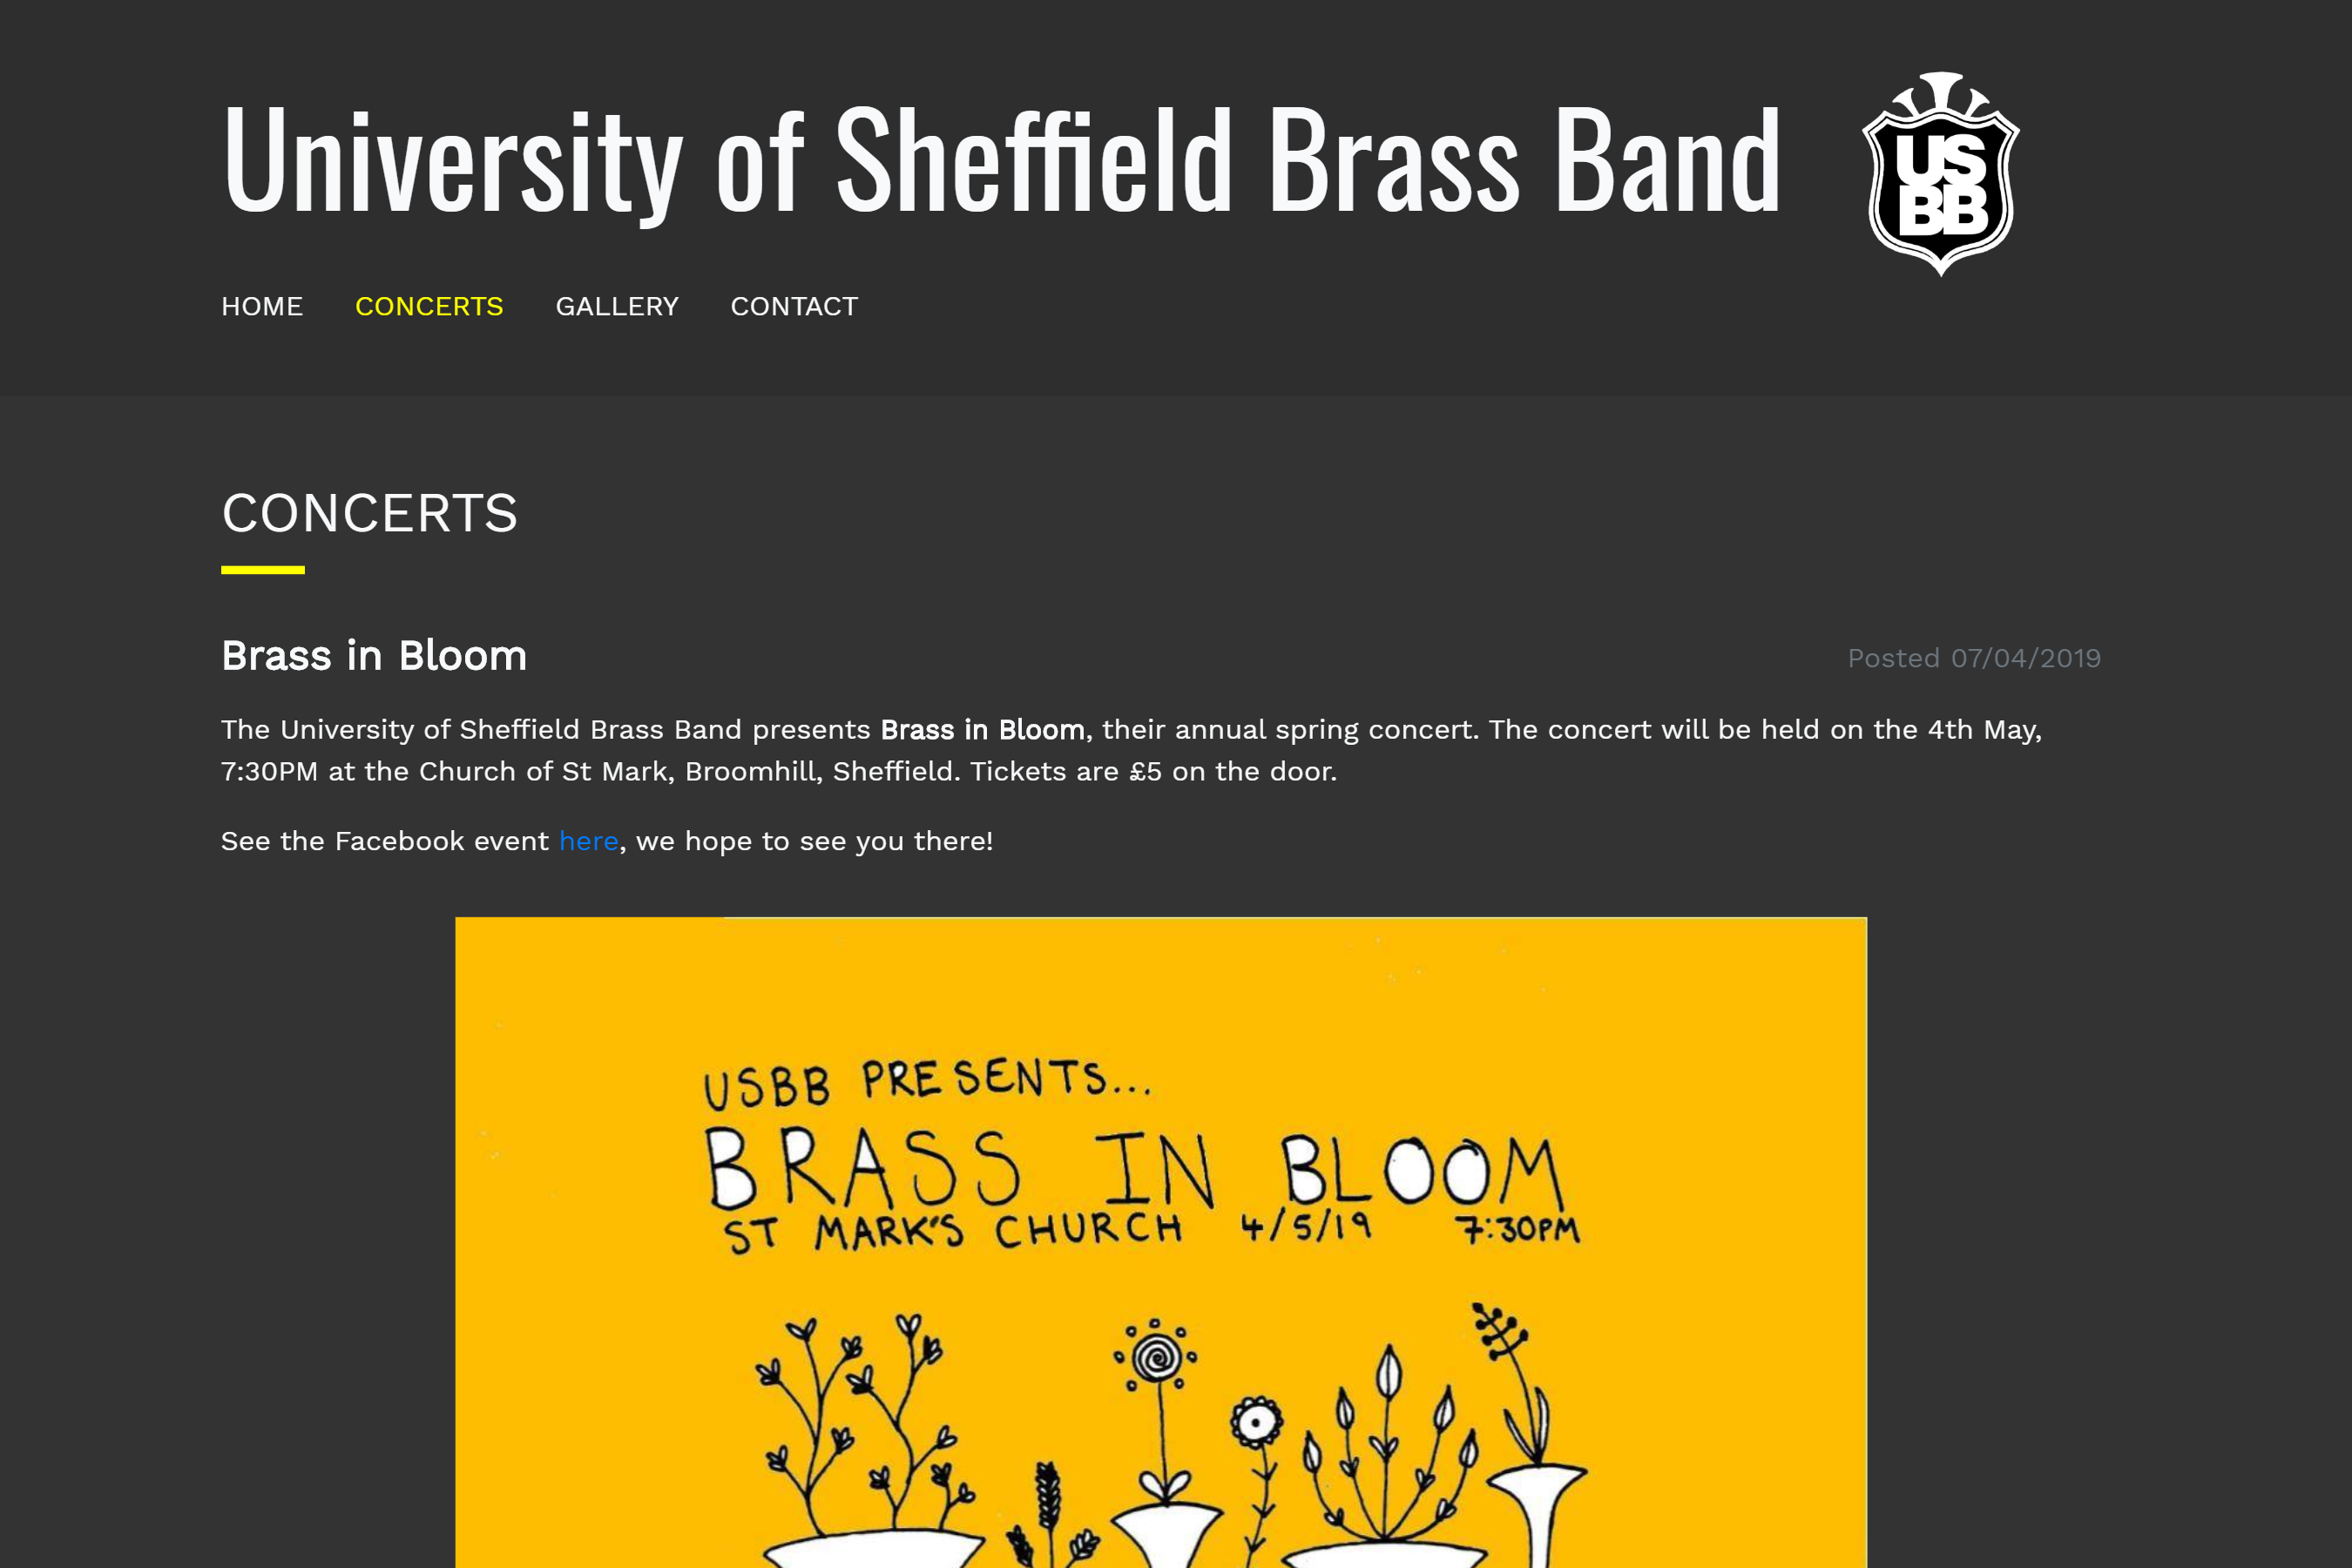 Screenshot of the concerts page of USBB's website